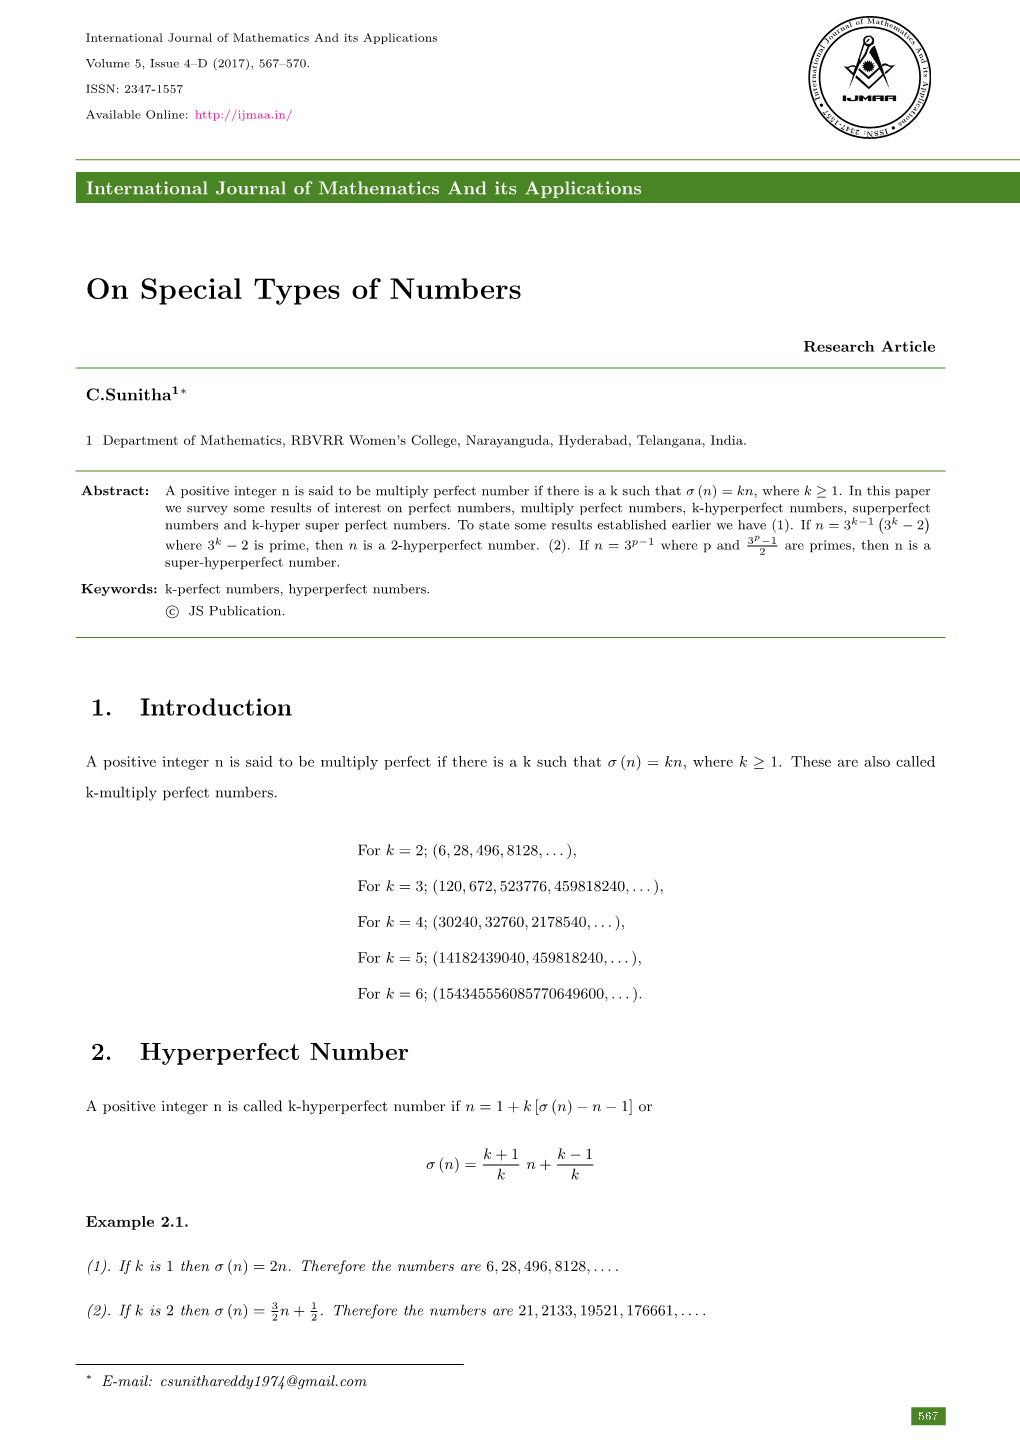 On Special Types of Numbers